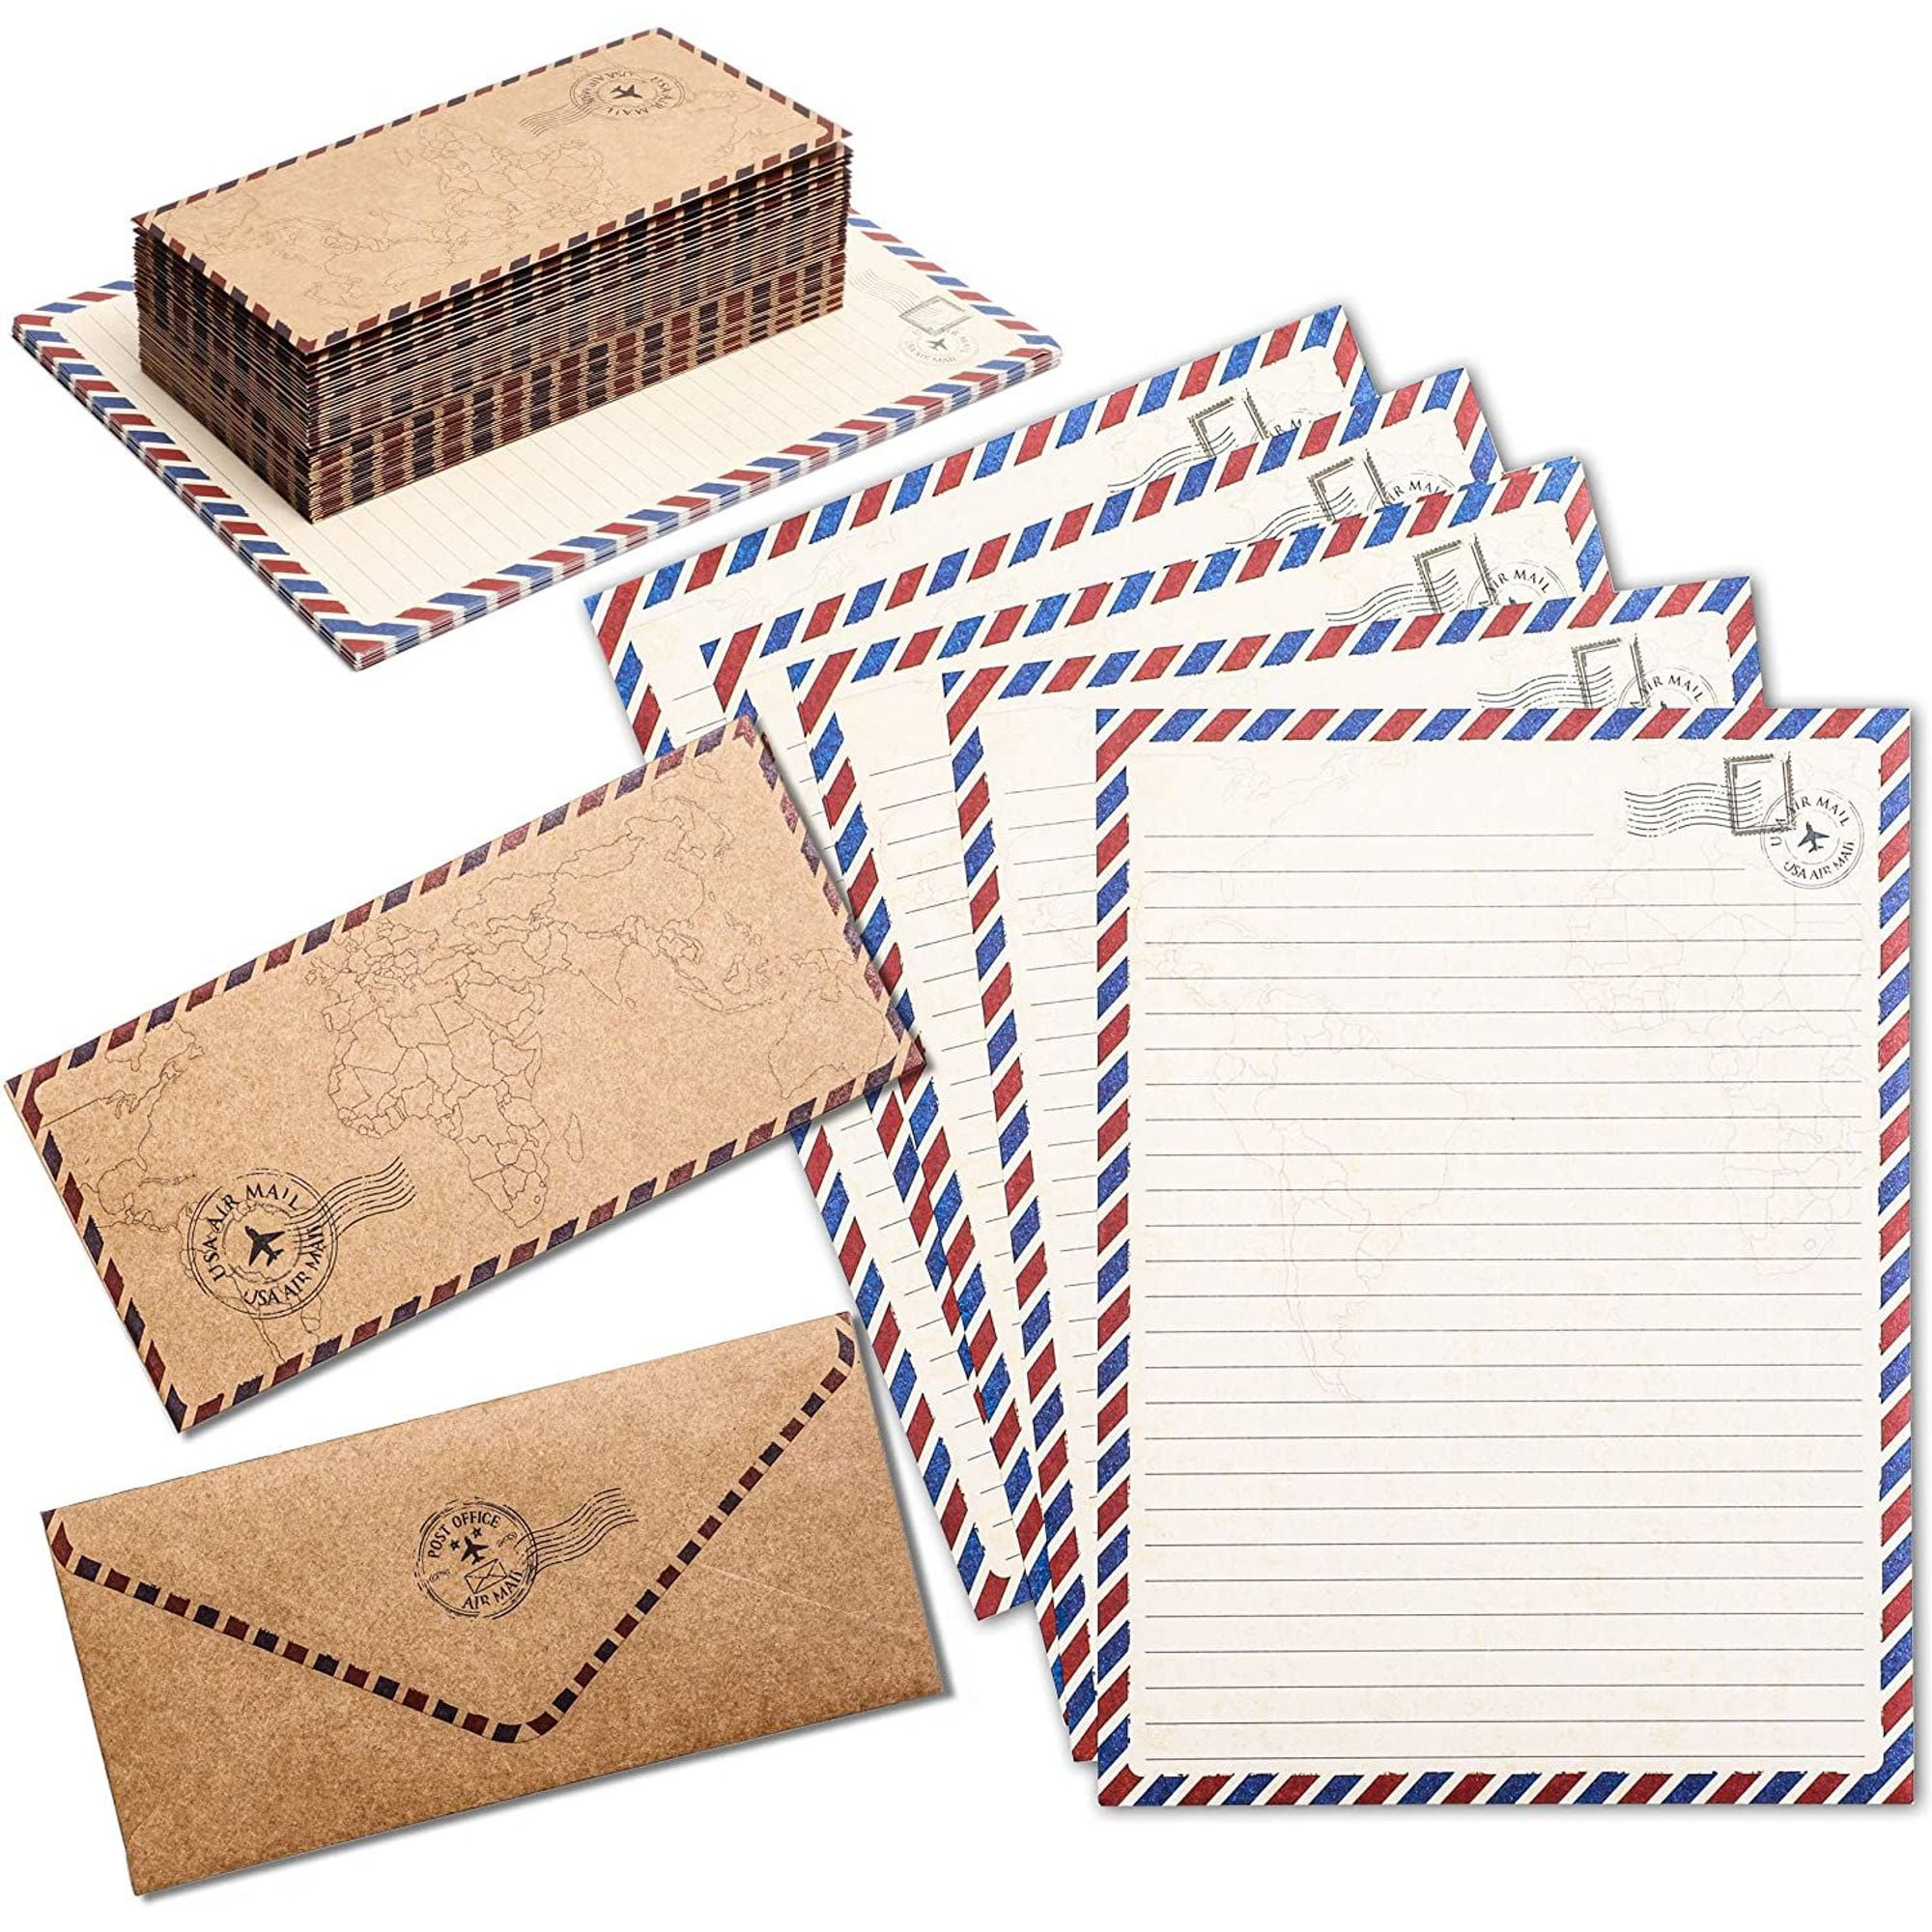 Iumer 8 PC Writing Stationery Paper Letter Set Envelopes Vintage Scrapbook Paper Friendly Stationery Paper,Big red